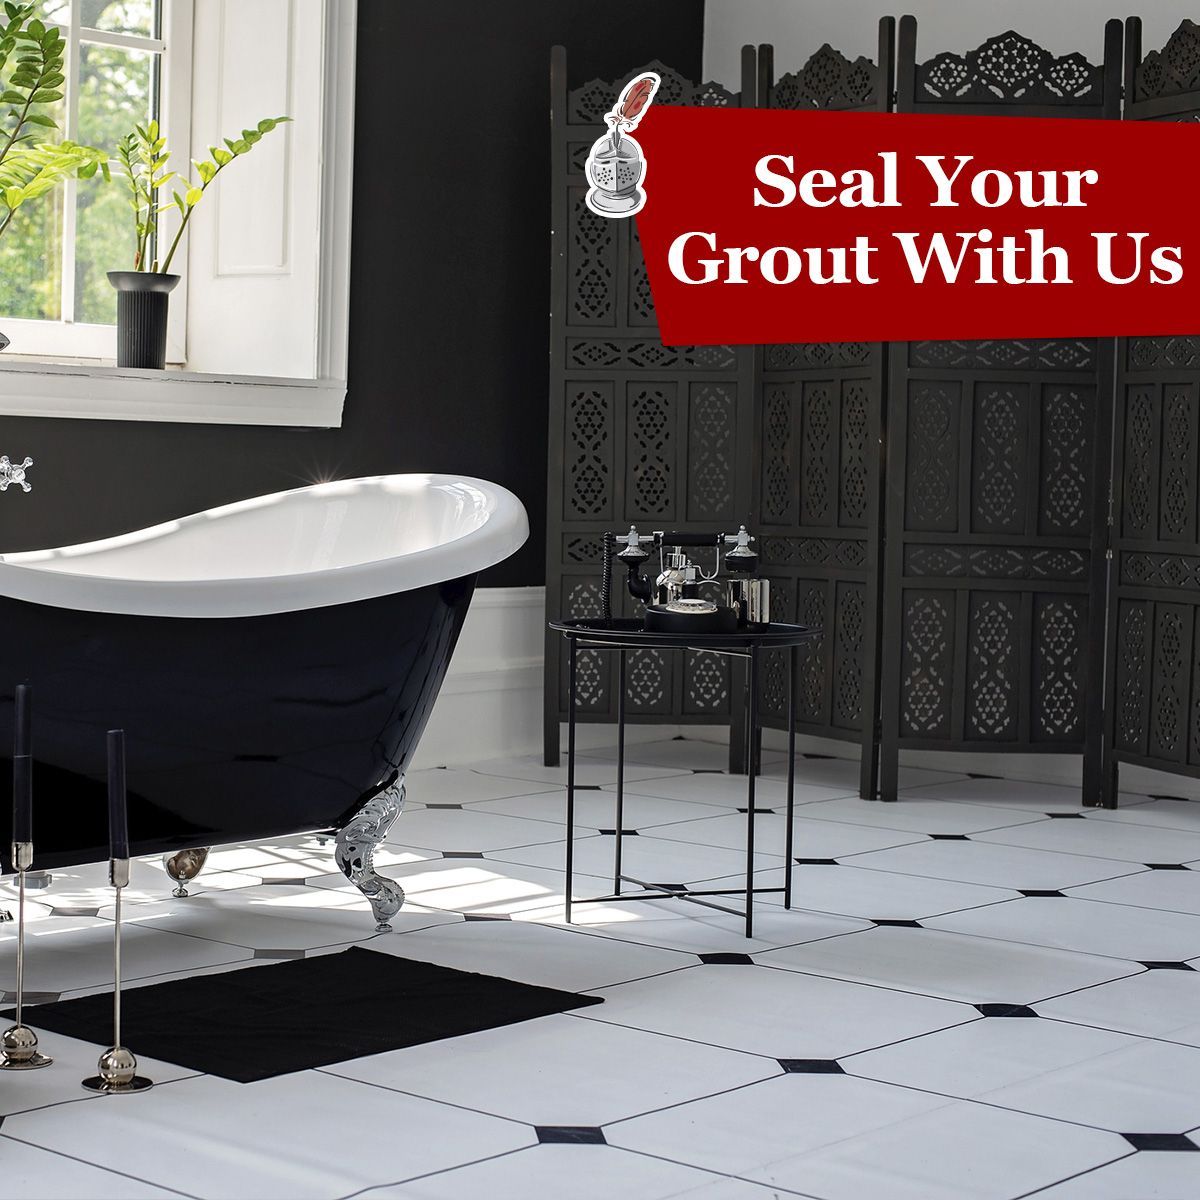 Seal Your Grout With Us